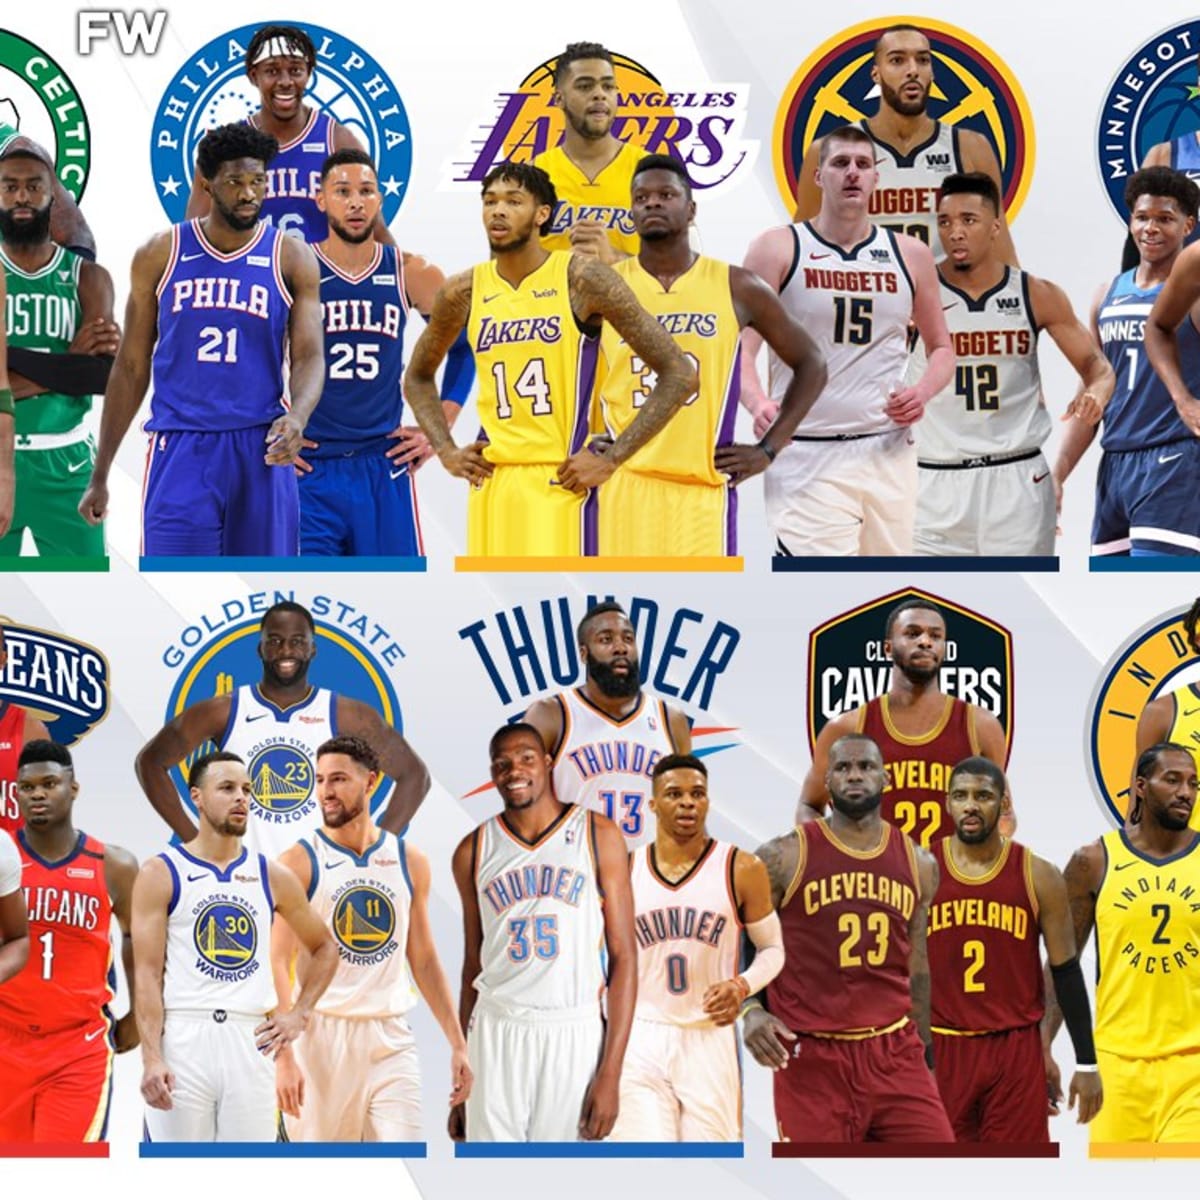 Has anyone won 3 NBA championships with 3 different teams? - Quora